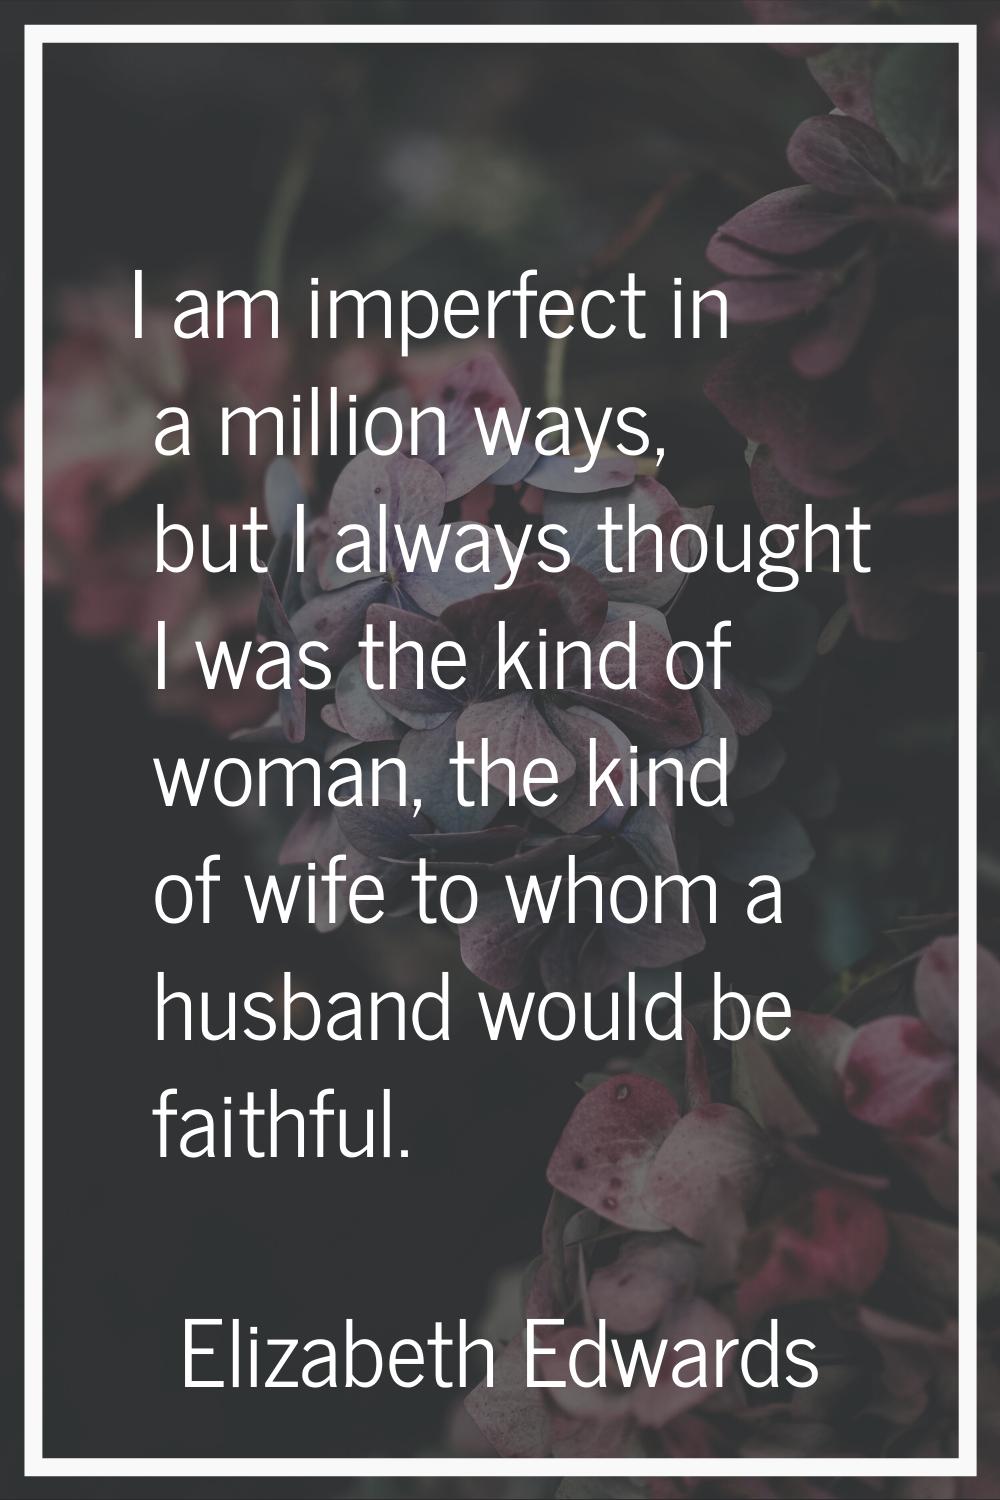 I am imperfect in a million ways, but I always thought I was the kind of woman, the kind of wife to